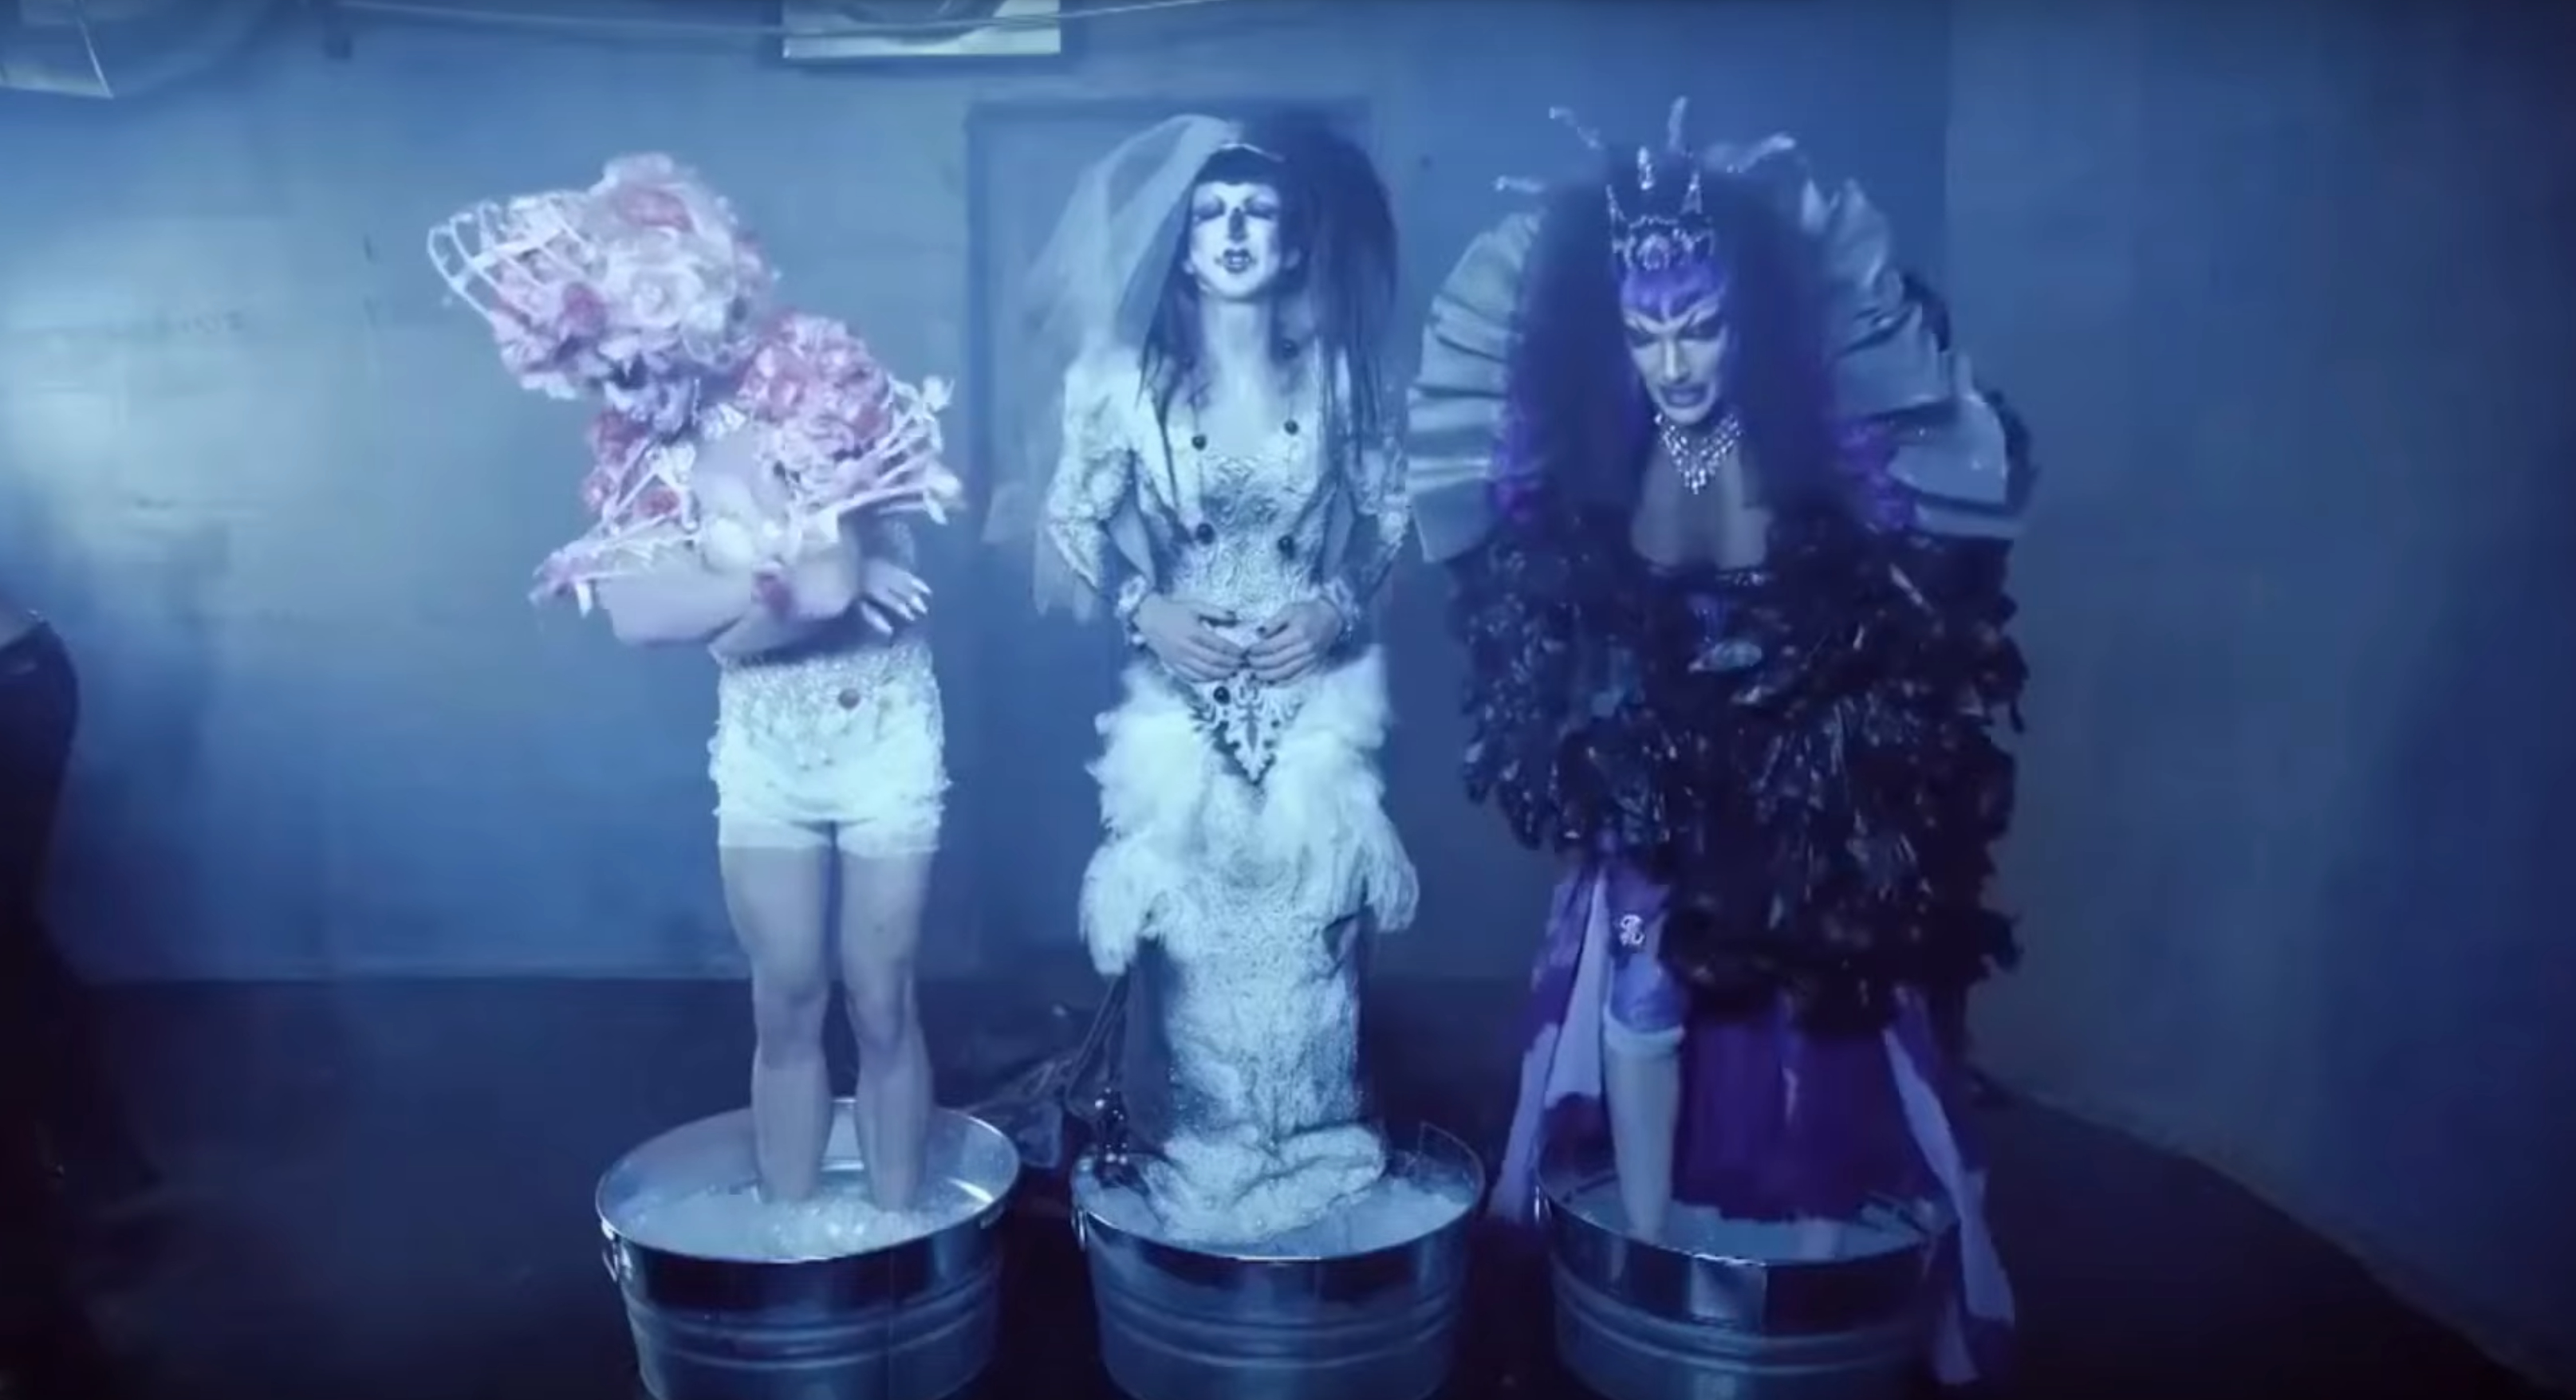 James Majesty, Abhora, and Disasterina standing in buckets of ice.